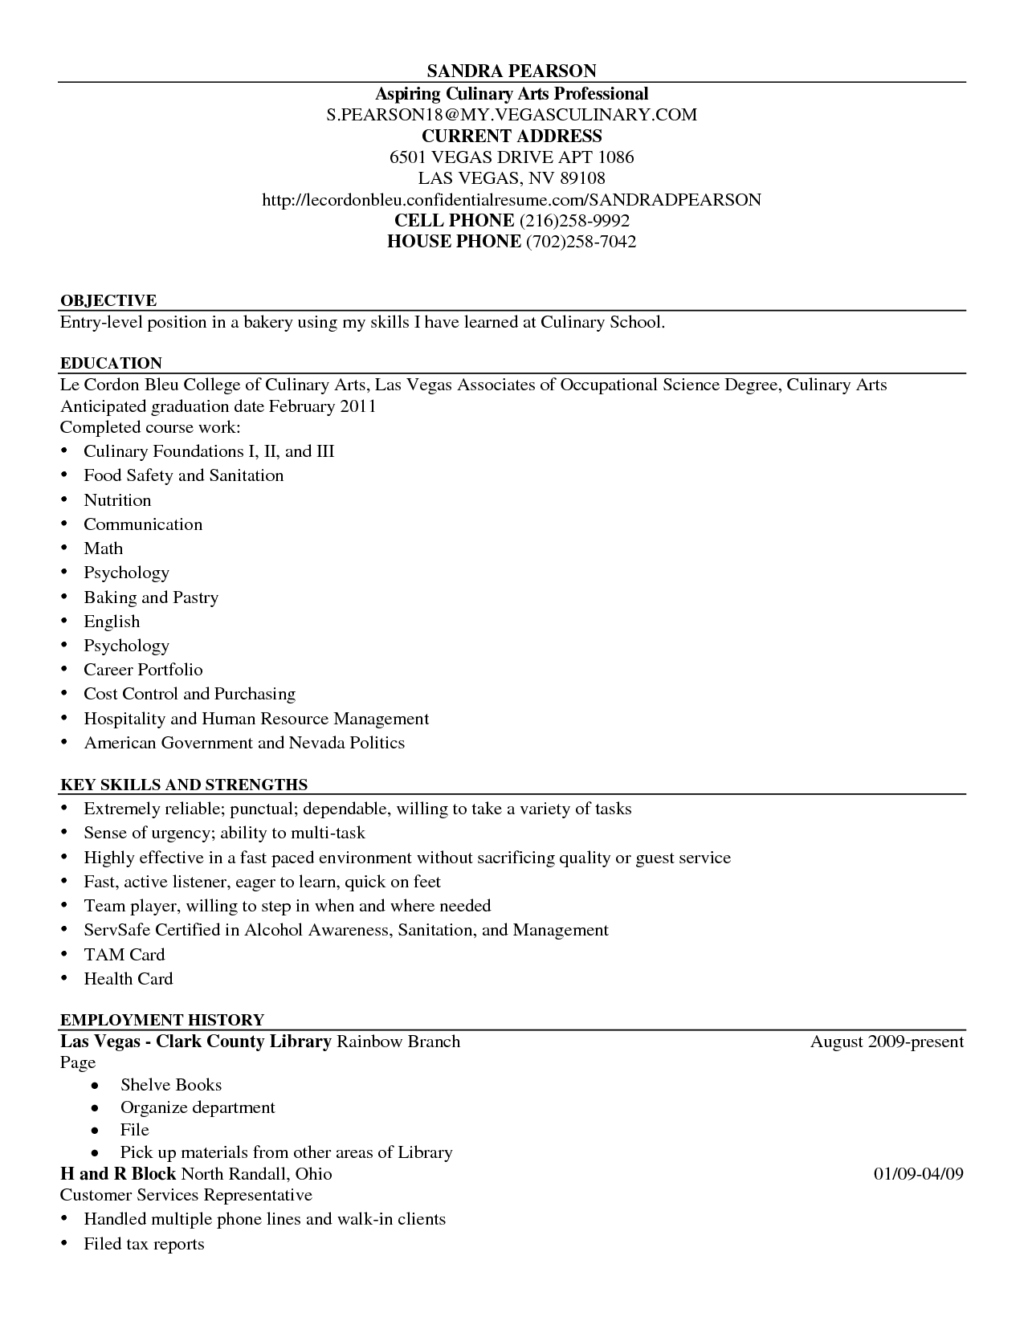 Bakery Manager Resume Examples 2019 Bakery Manager Resume Skills 2020 bakery manager resume examples bakery manager resume skills bakery manager resume objective 2019 bakery production manager resume bakery general manager